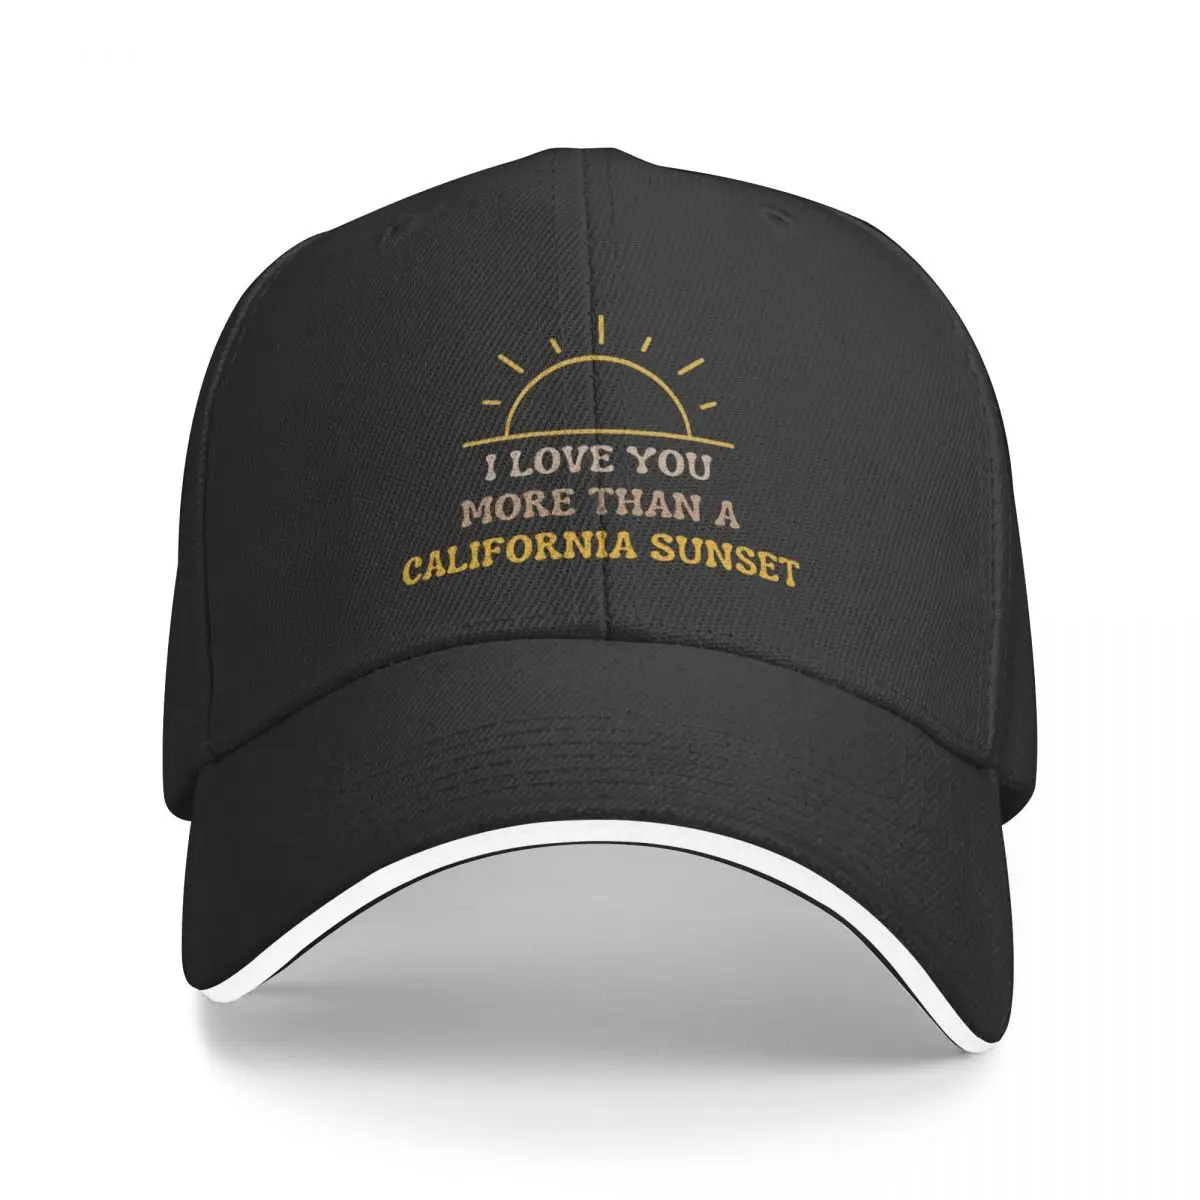 

New I Love You More Than California Sunset - Valentines Day gifts Baseball Cap Big Size Hat cute Golf Hat Men Women's